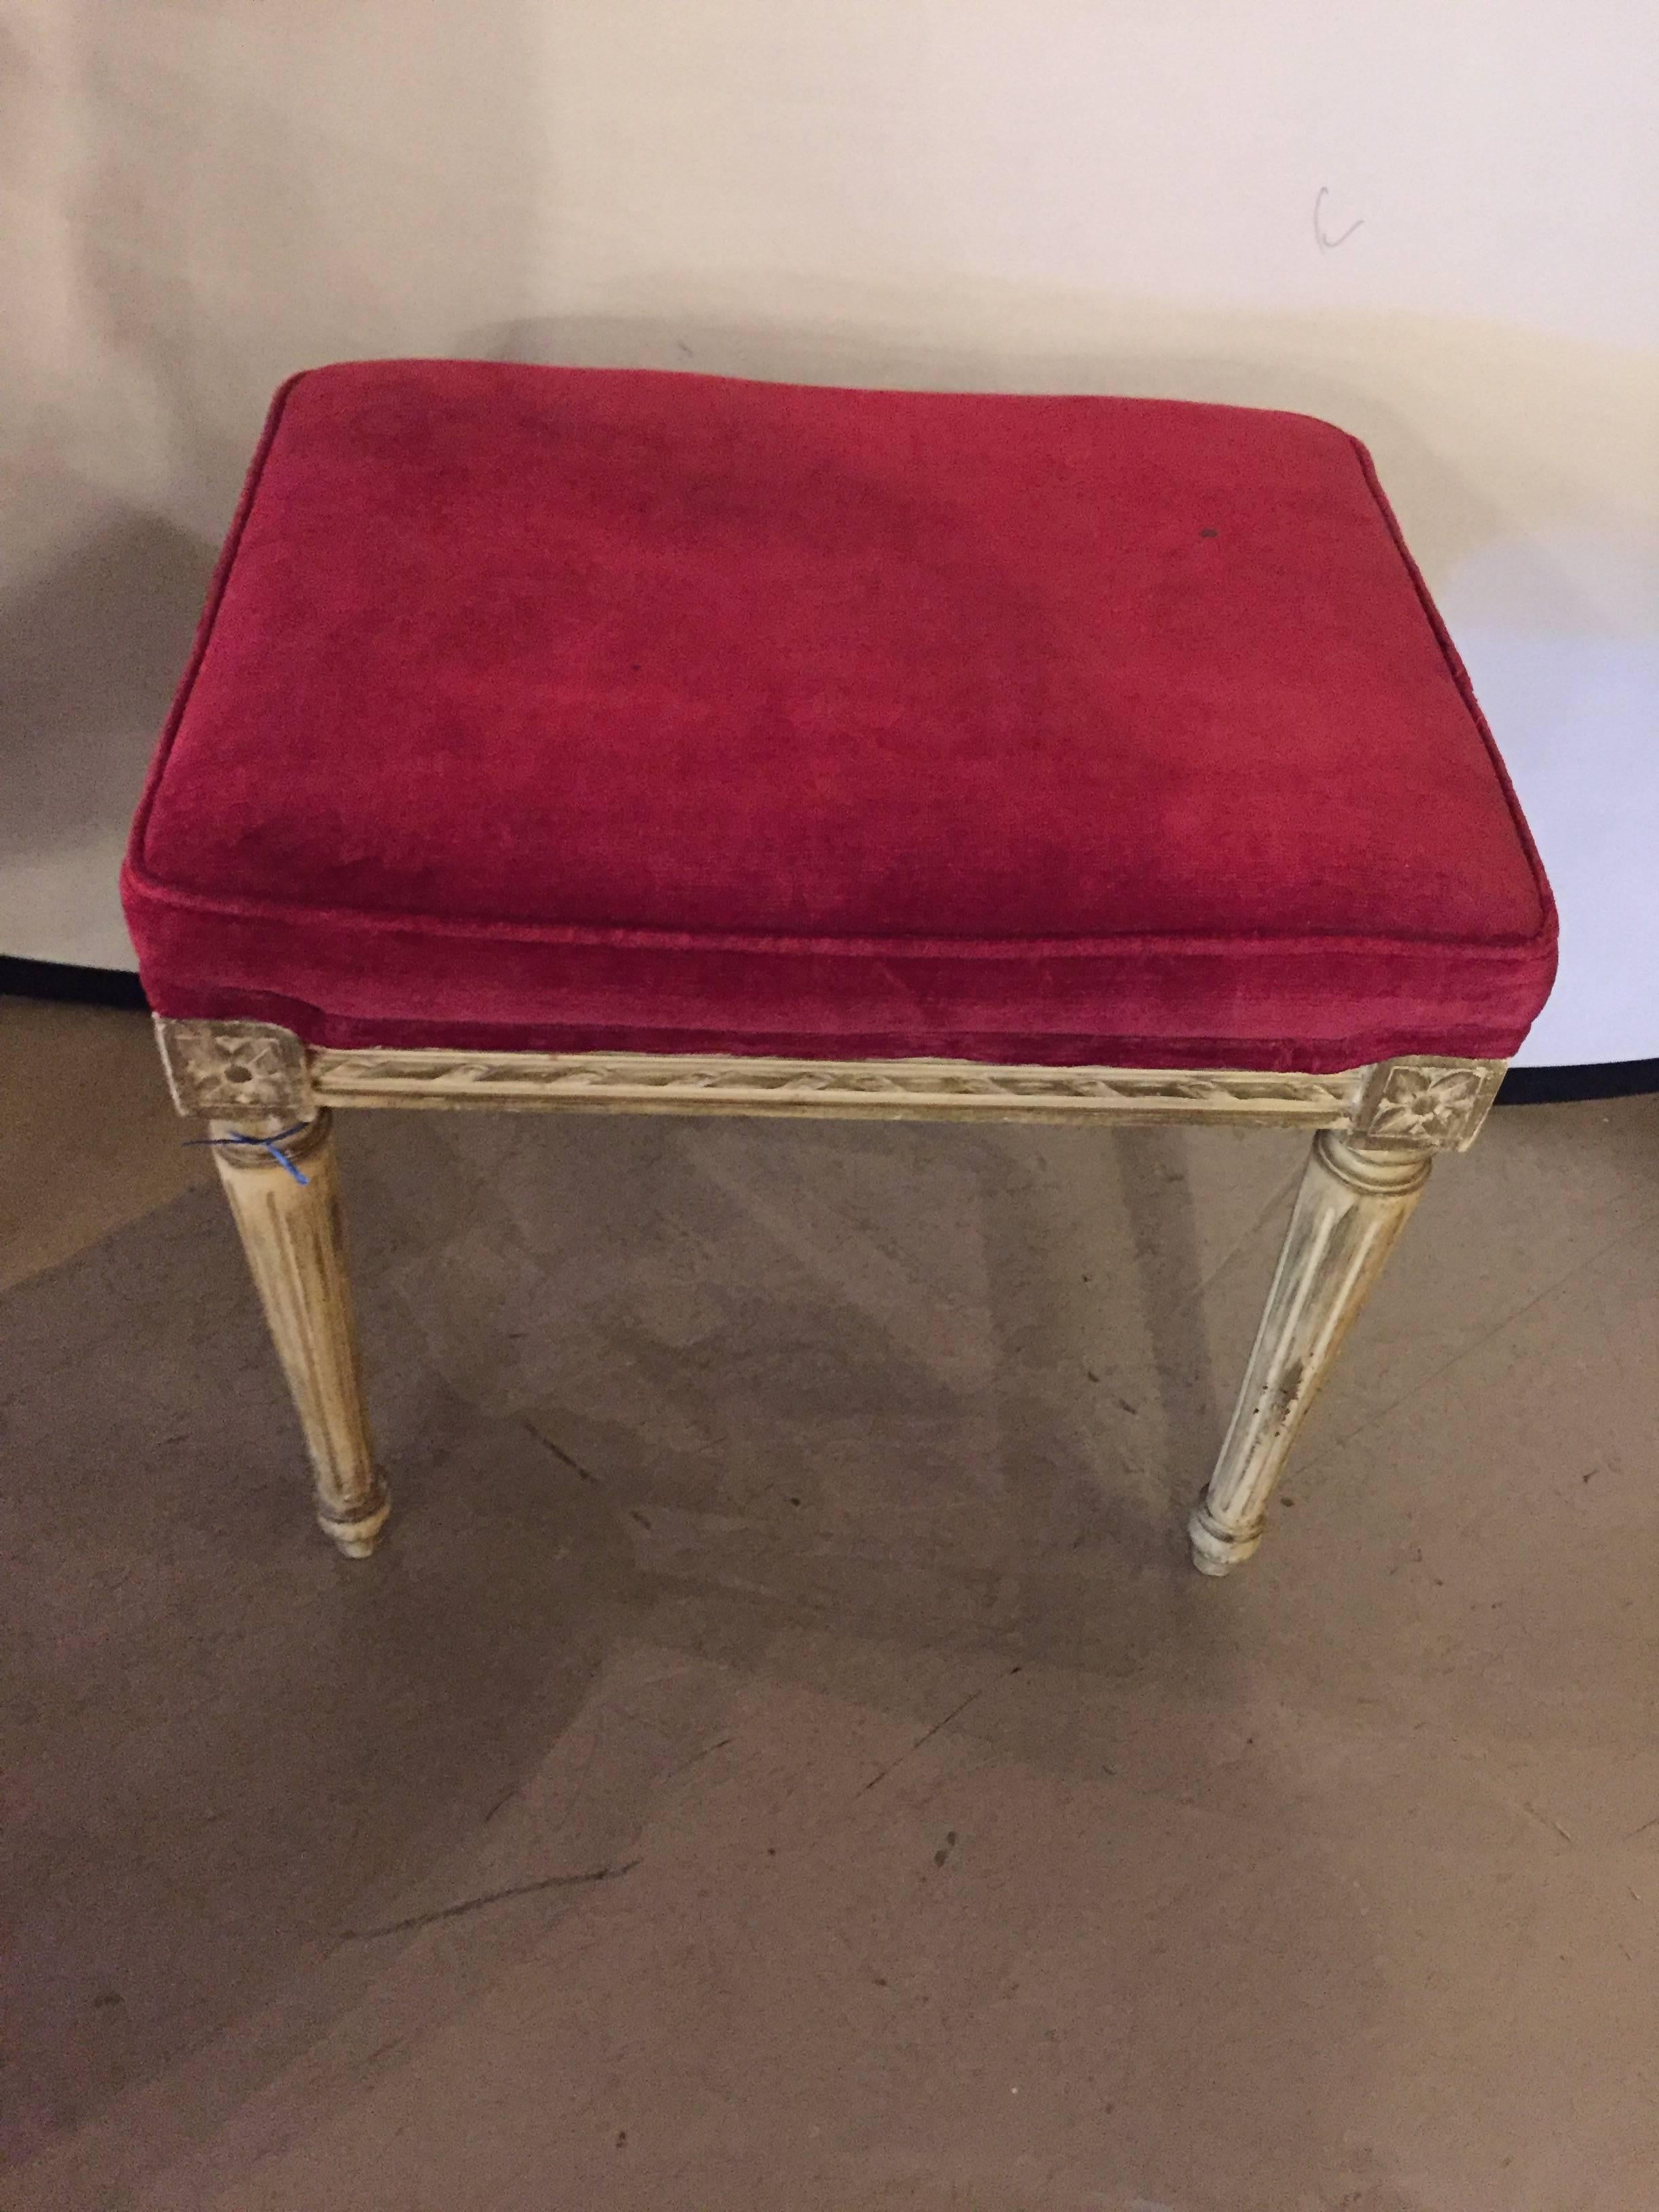 Distressed painted stool with velvet upholstery. Off-white distressed finish on Louis XVI reeded legs.